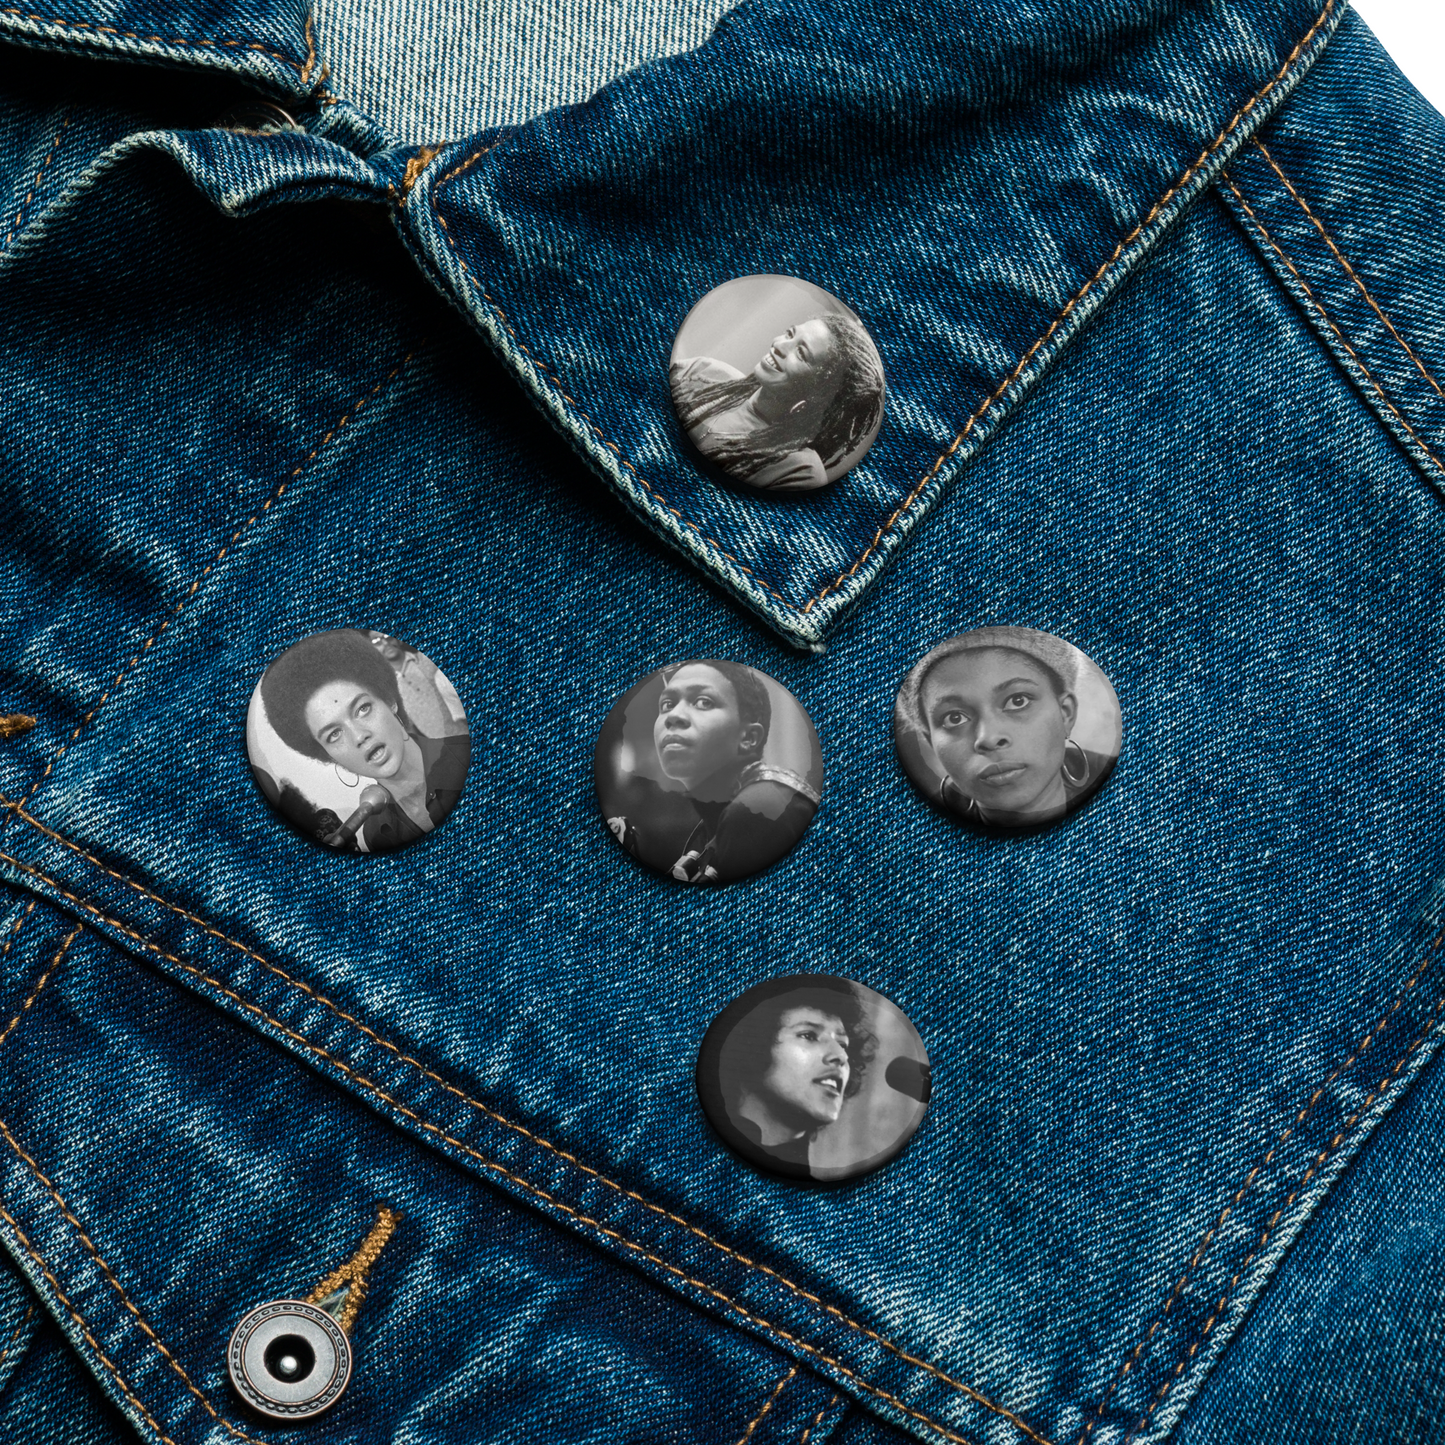 Women of the Black Panther Party Pin-back Buttons (Set of 5)